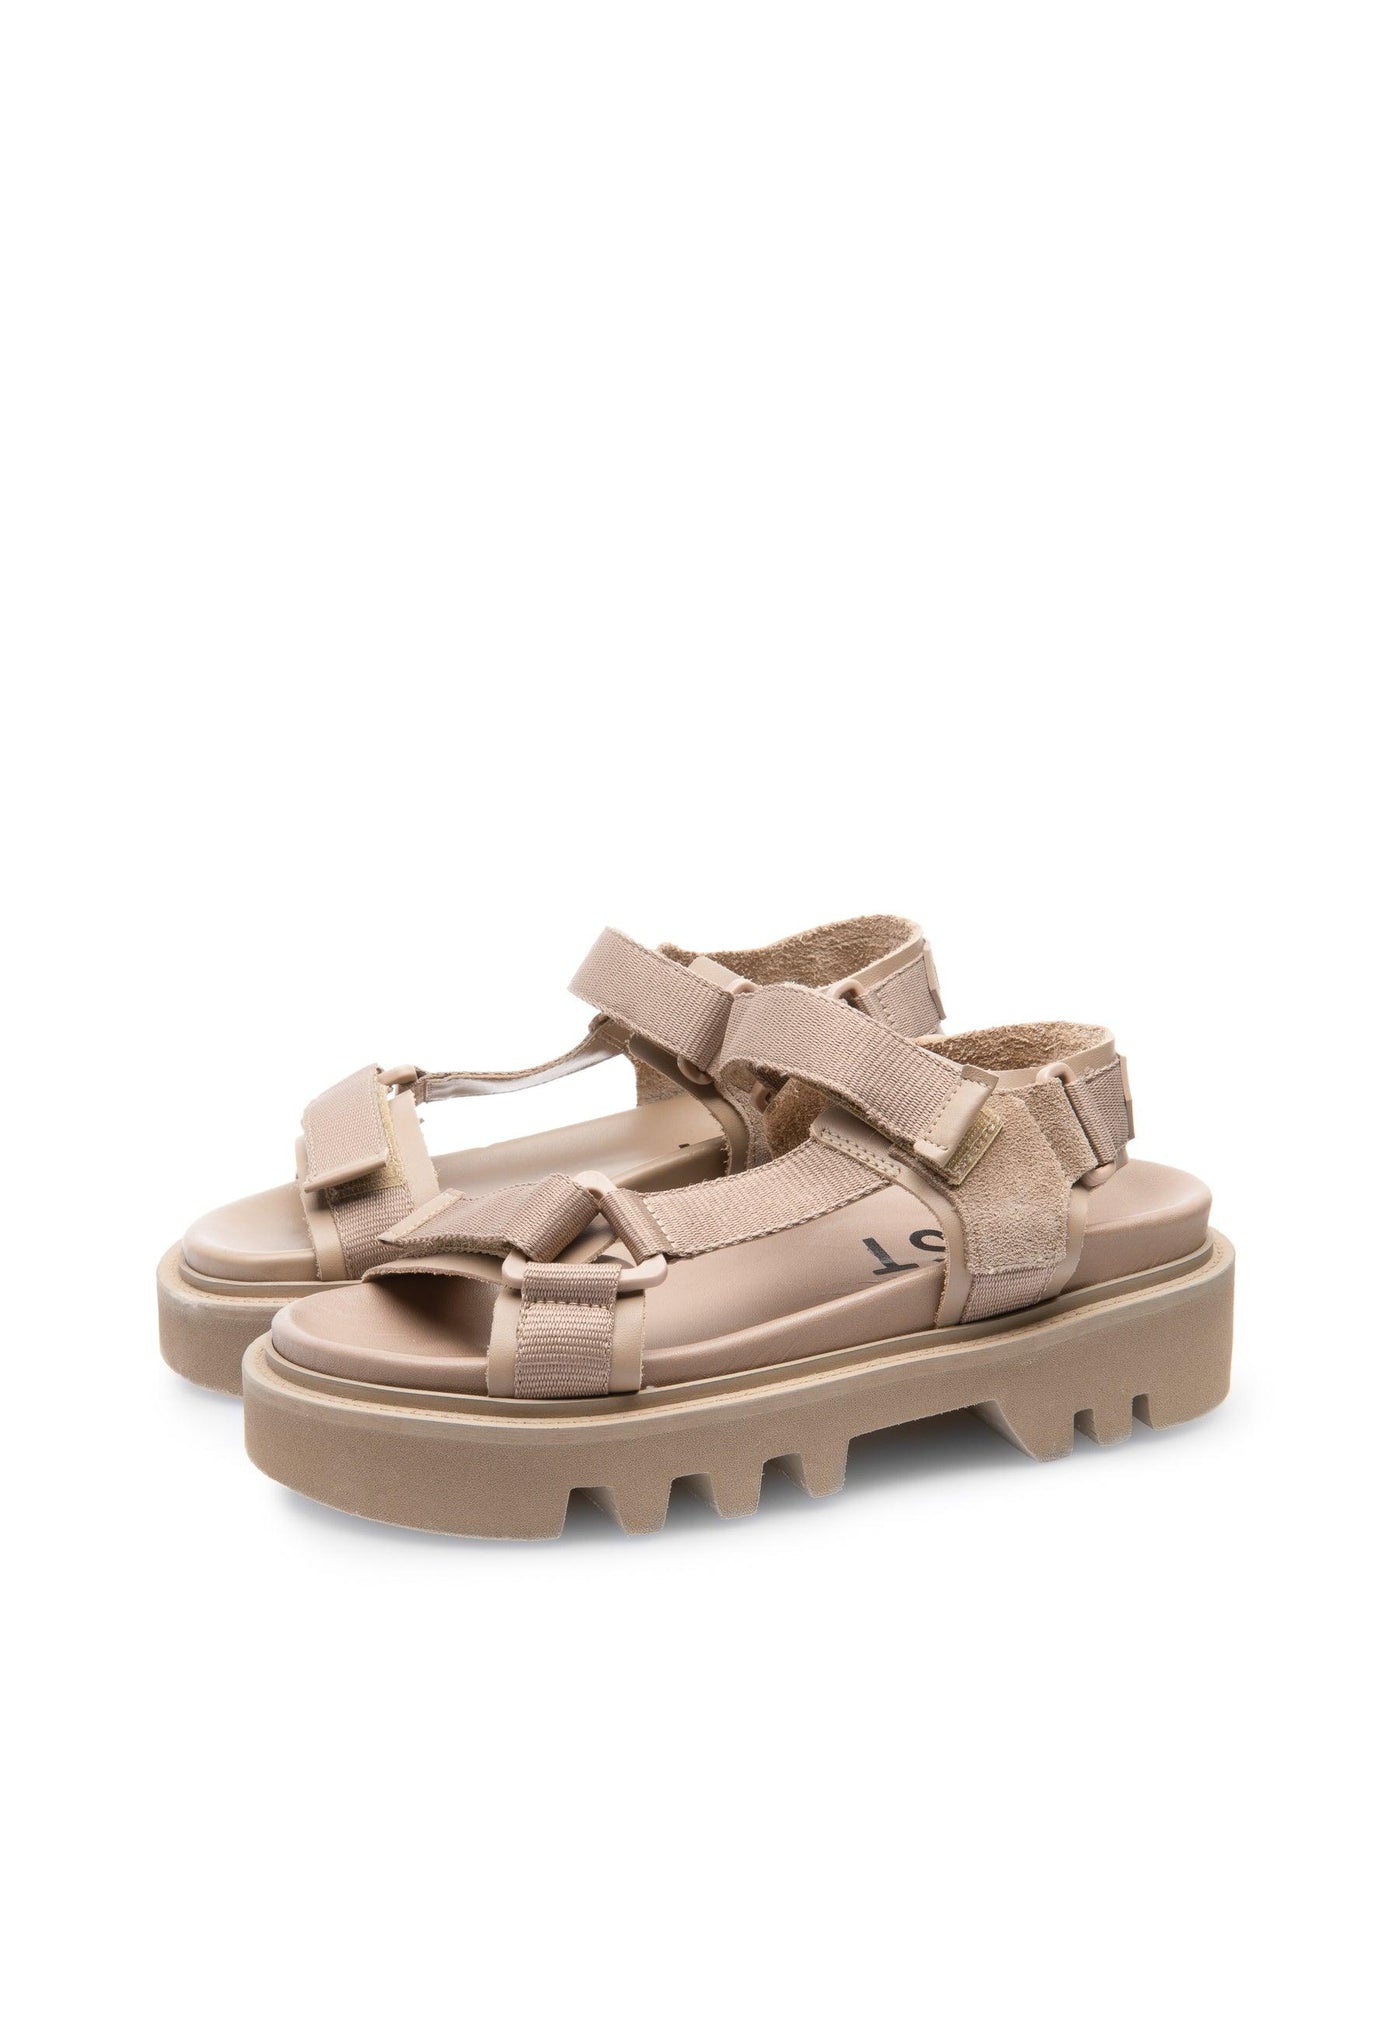 LÄST Candy Taupe Sandals Taupe